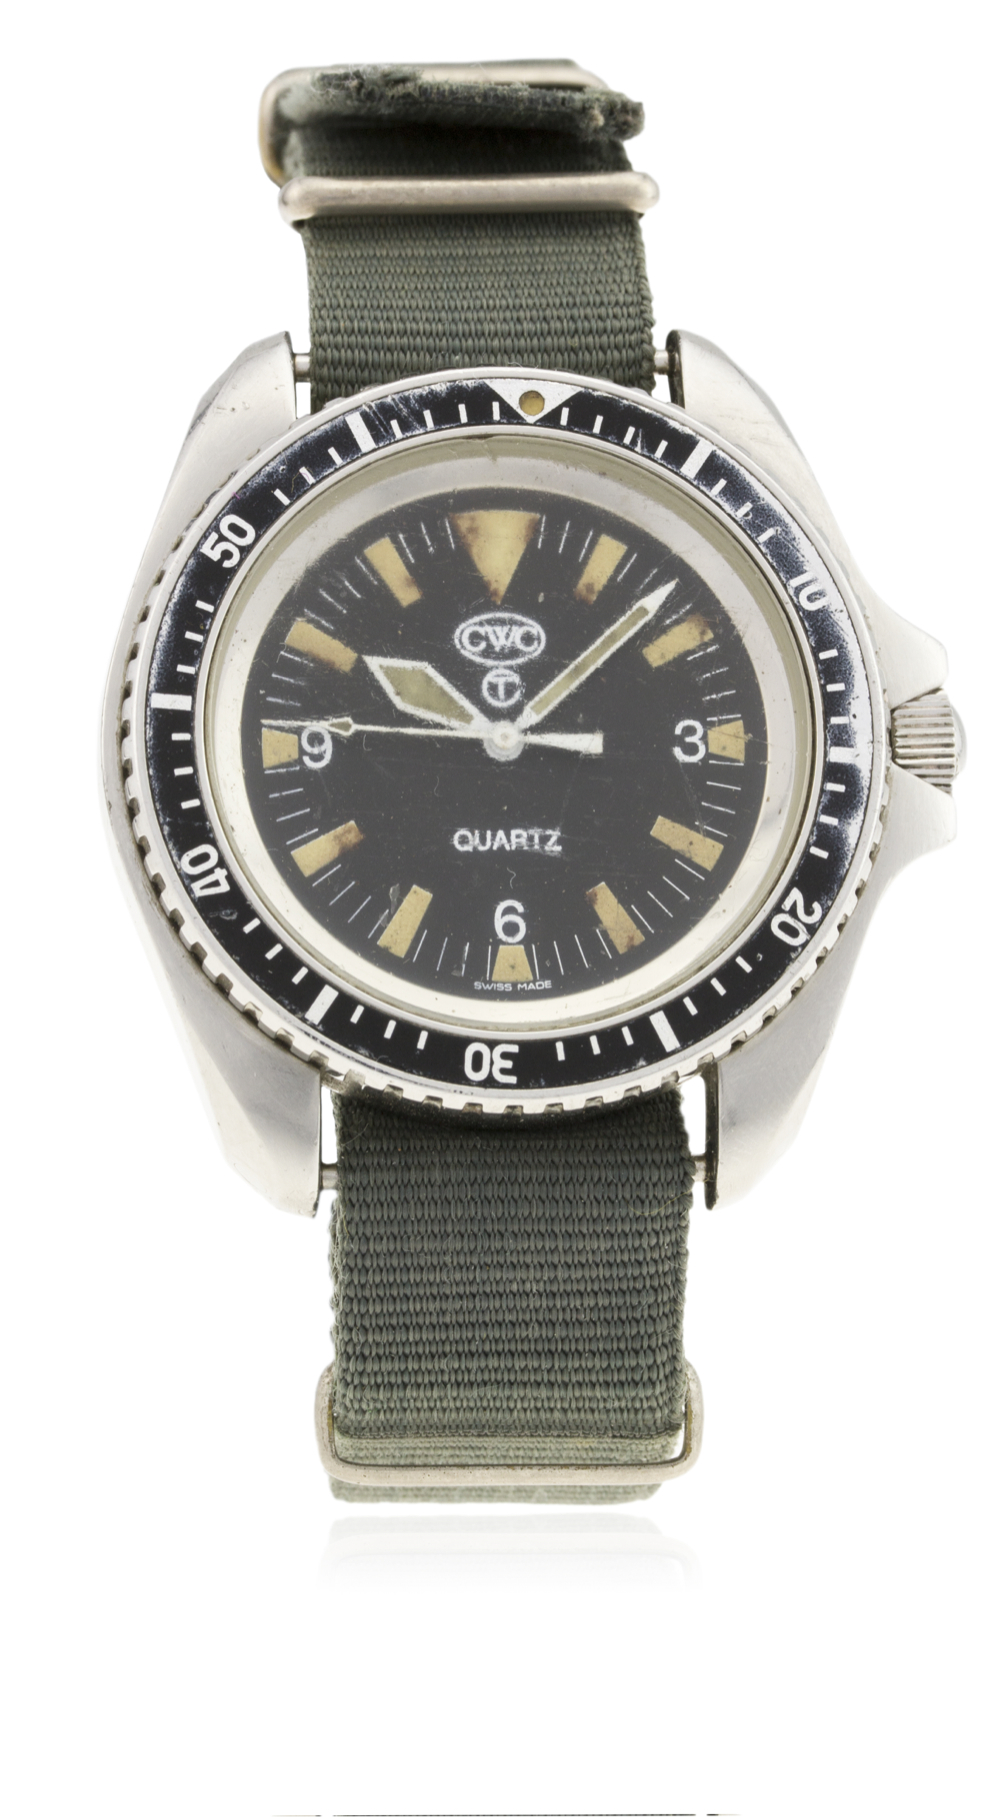 A RARE GENTLEMAN'S STAINLESS STEEL BRITISH MILITARY CWC QUARTZ ROYAL NAVY DIVERS WRIST WATCH DATED